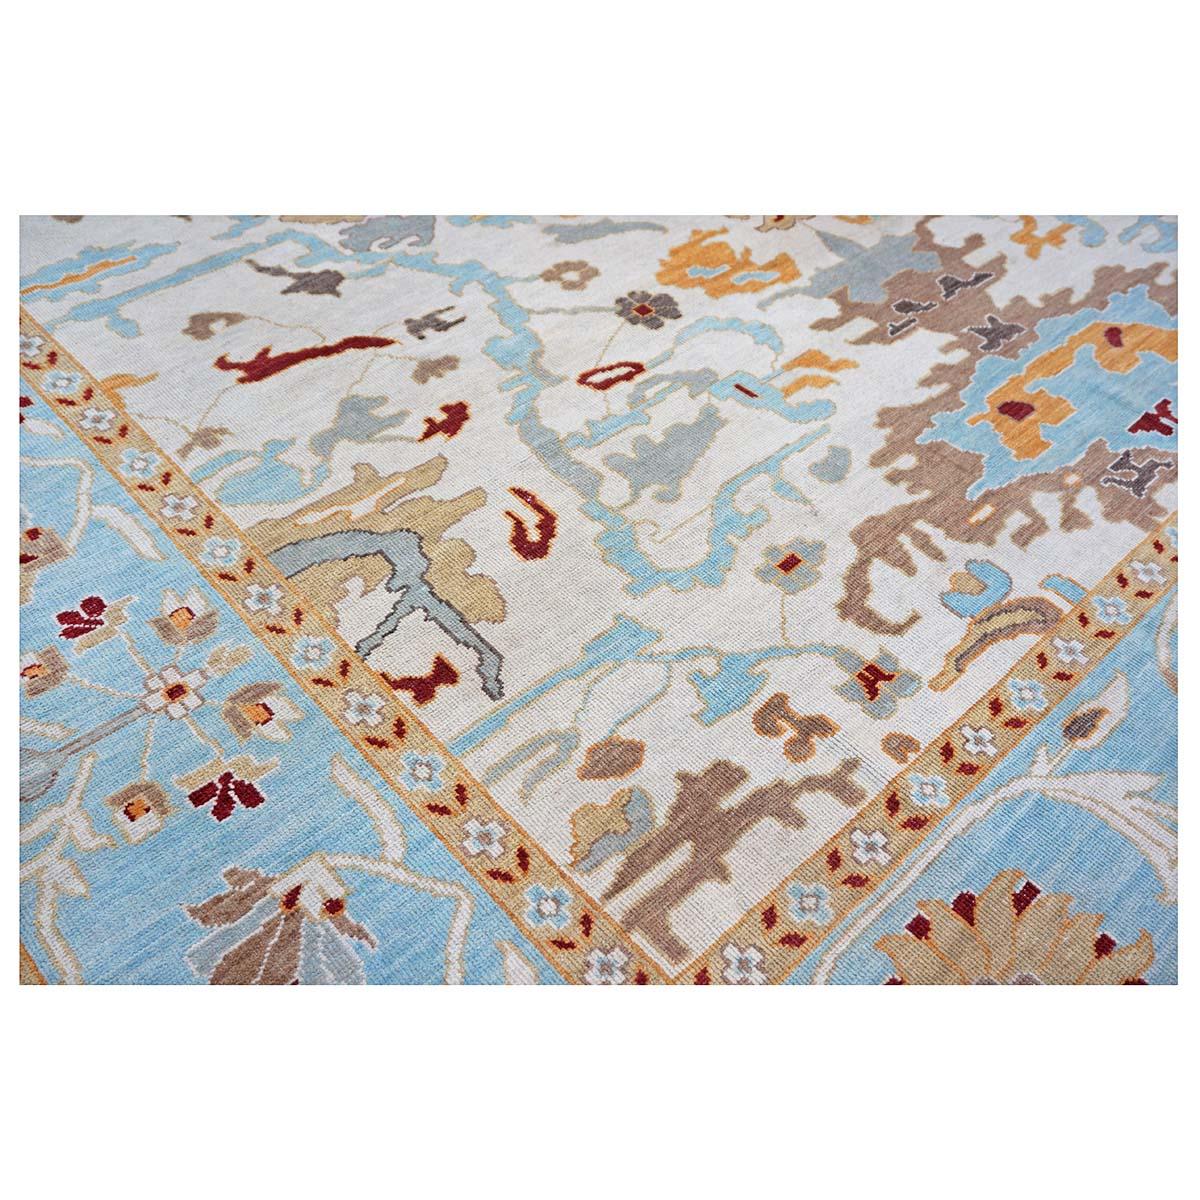 21st Century Sultanabad Master 10x14 Blue, Ivory, & Orange Handmade Area Rug In Excellent Condition For Sale In Houston, TX